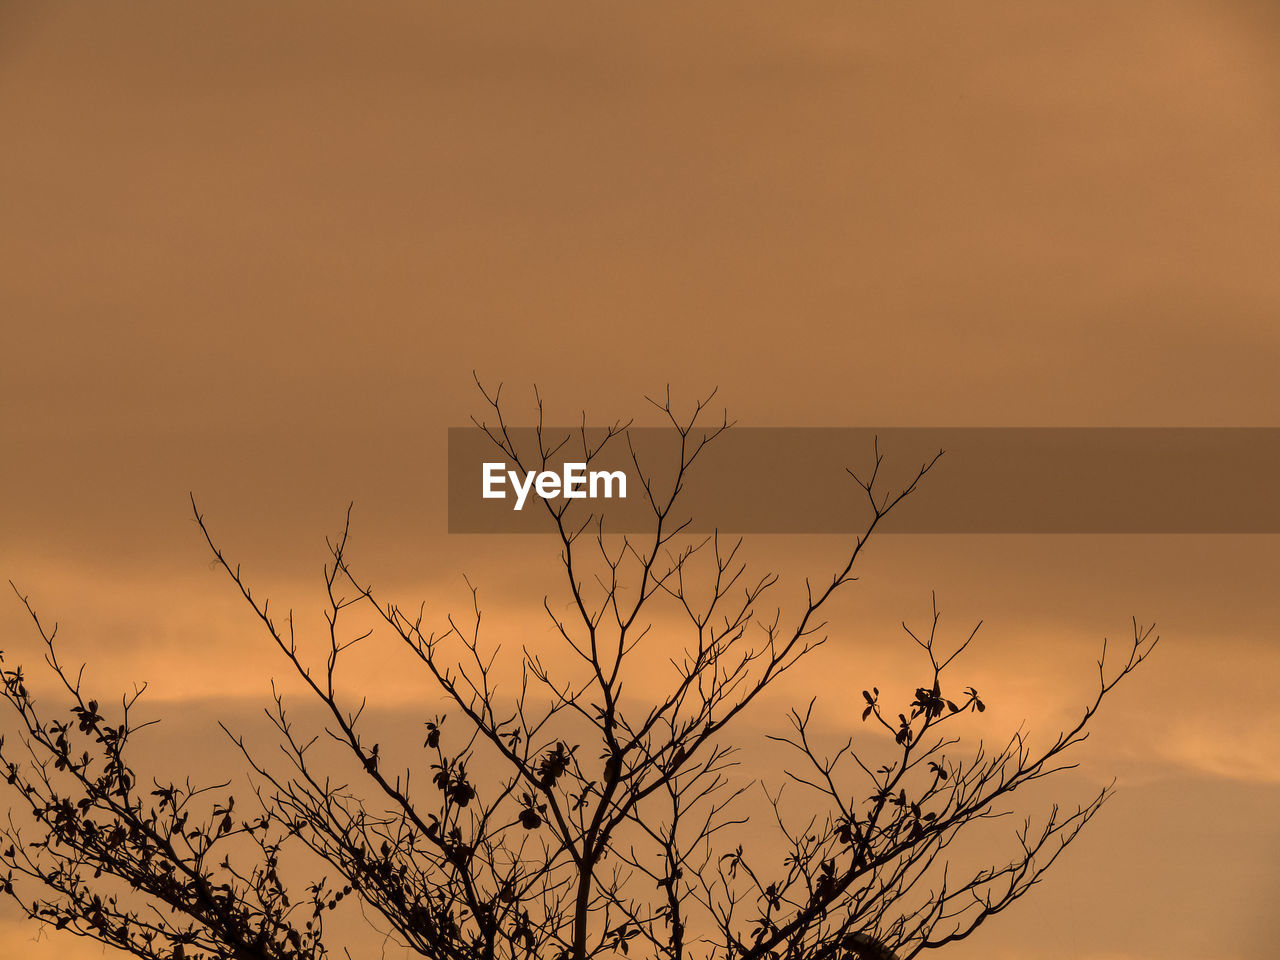 sunset, sky, plant, silhouette, nature, beauty in nature, prairie, landscape, scenics - nature, branch, tree, horizon, environment, dawn, no people, tranquility, twilight, grass, evening, orange color, cloud, sun, outdoors, land, savanna, dramatic sky, tranquil scene, sunlight, non-urban scene, copy space, vibrant color, yellow, rural scene, multi colored, backgrounds, gold, field, idyllic, back lit, growth